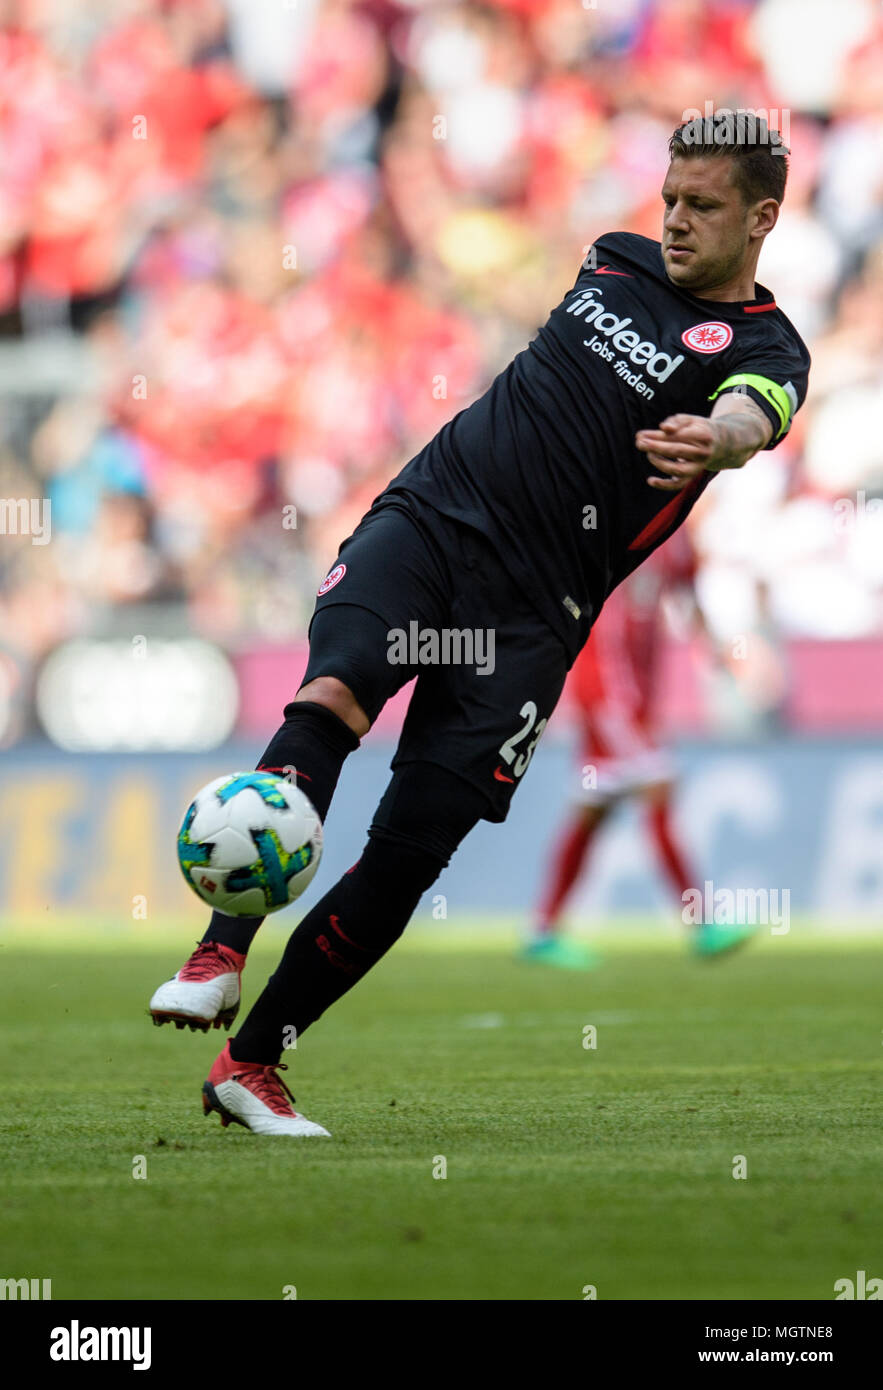 Munich, Germany. 28 April 2018. Soccer, Bundesliga, Bayern Munich vs Eintracht Frankfurt, at Allianz Arena: Frankfurt's Marco Russ. Photo: Matthias Balk/dpa - IMPORTANT NOTICE: Due to the German Football League·s (DFL) accreditation regulations, publication and redistribution online and in online media is limited during the match to fifteen images per match Credit: dpa picture alliance/Alamy Live News Stock Photo